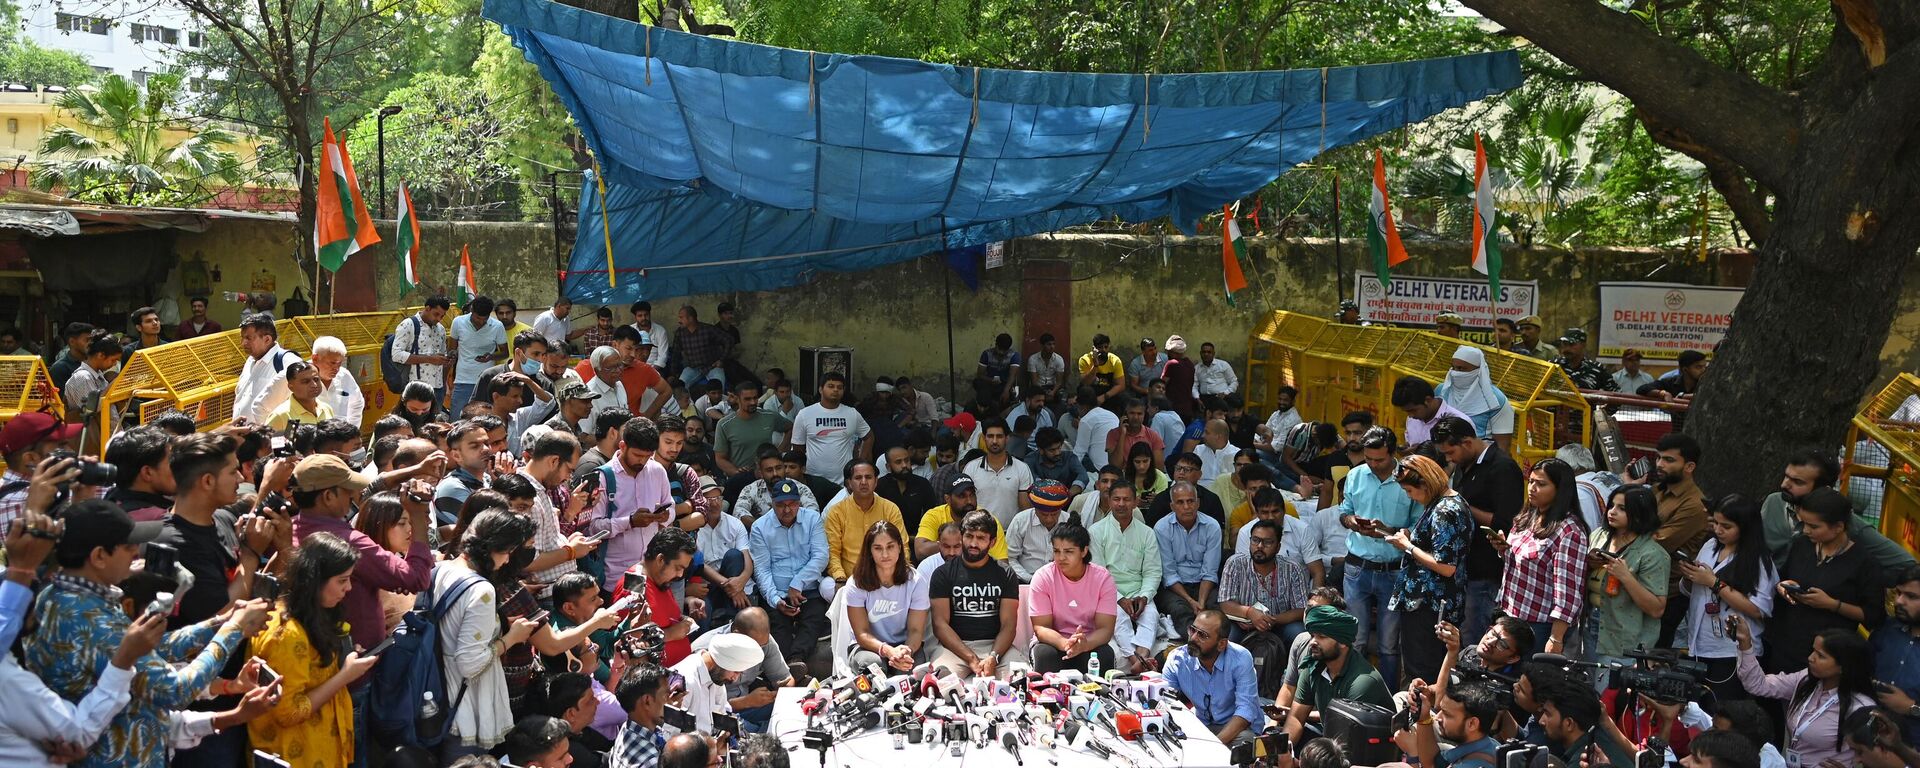 Indian wrestlers Bajrang Punia (C), Sakshi Malik (center R) and Vinesh Phogat (center L) address a press conference while taking part in an ongoing protest against the Wrestling Federation of India (WFI) in New Delhi on April 24, 2023, following allegations of sexual harassment to athletes by members of the WFI. - Sputnik India, 1920, 25.04.2023